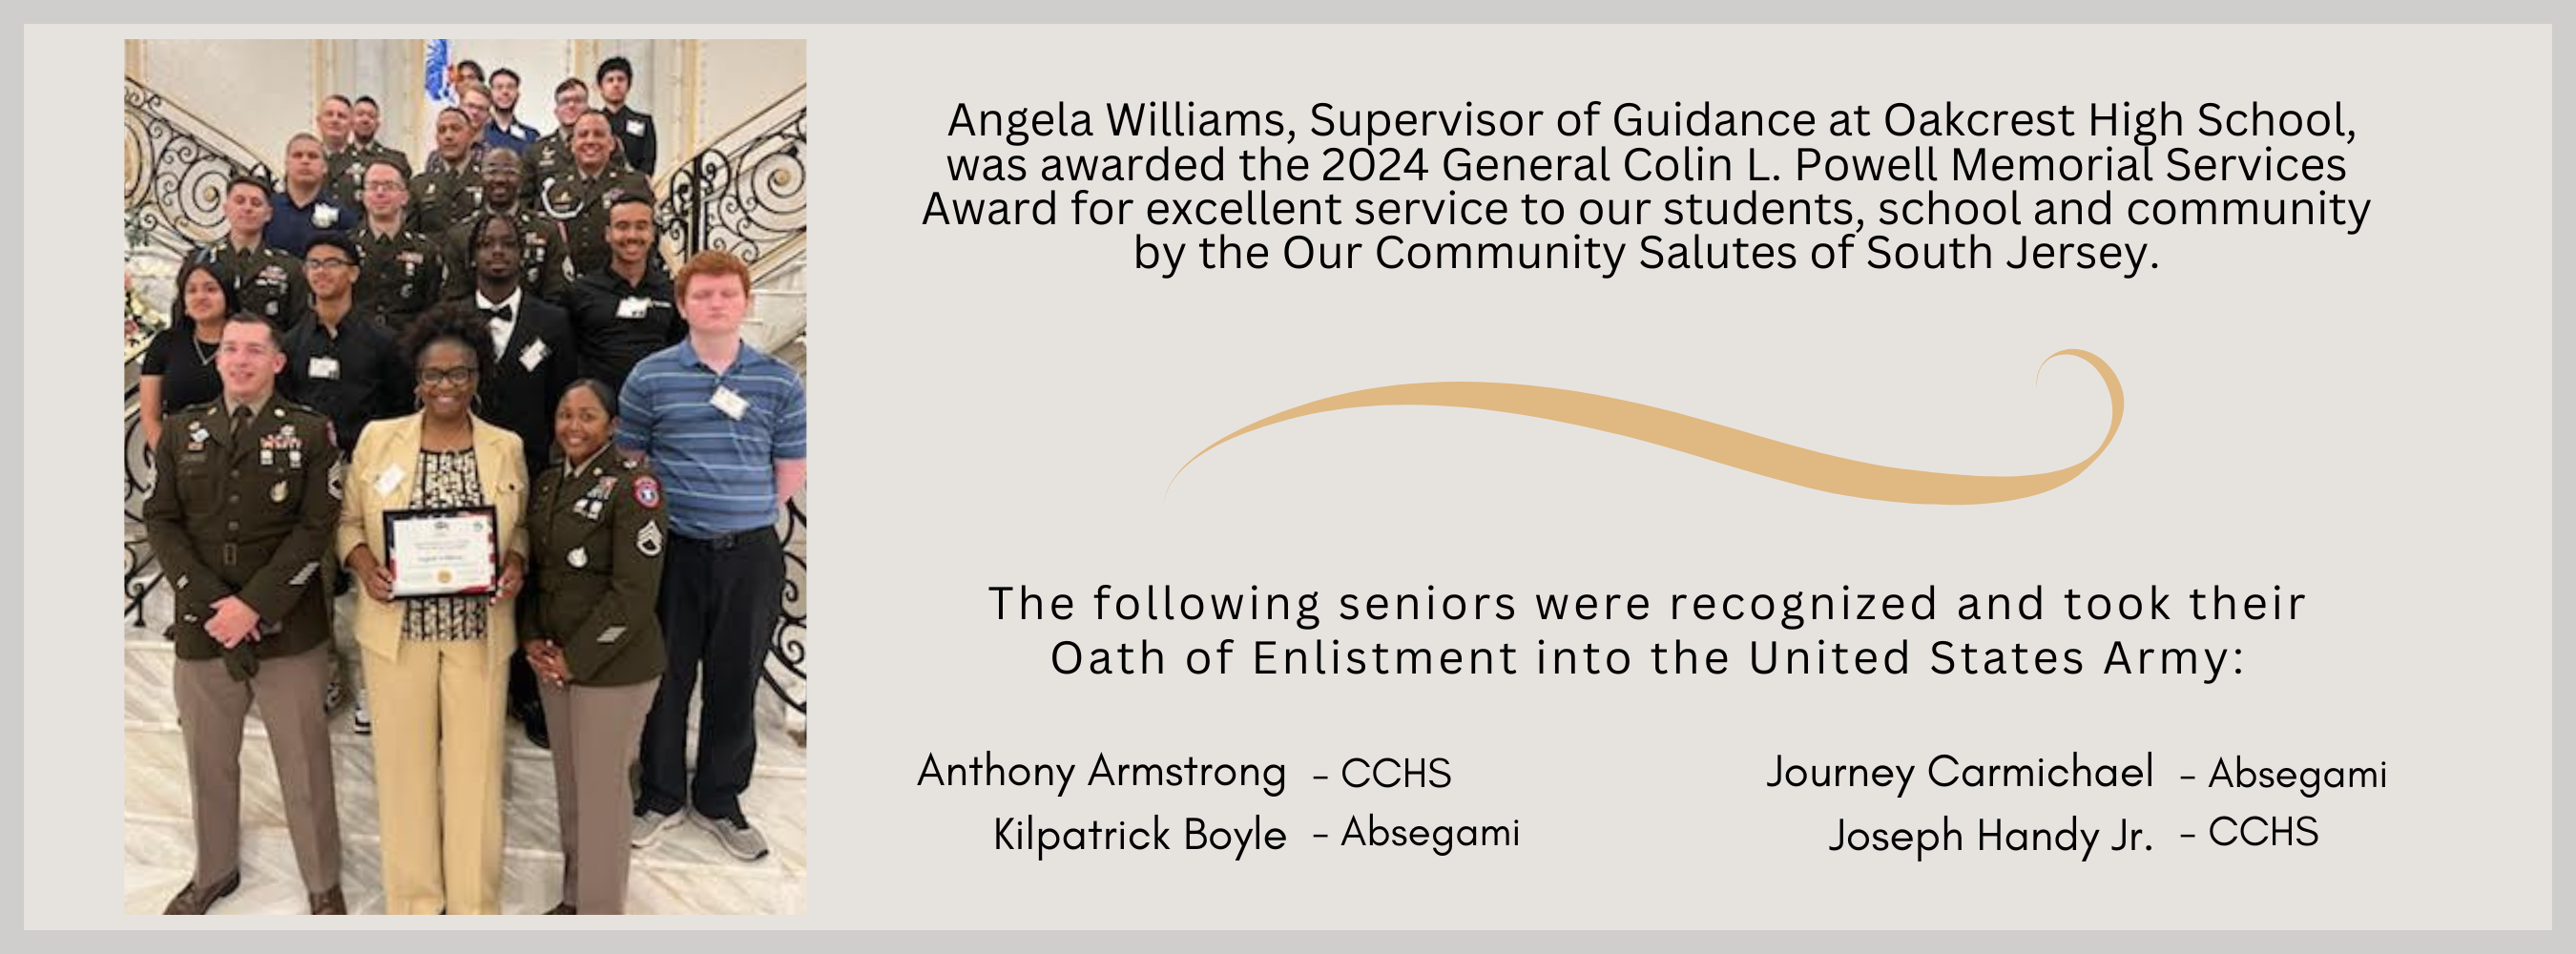  Angela Williams, Supervisor of Guidance at Oakcrest High School, was awarded the 2024 General Colin L. Powell Memorial Services Award for excellent service to our students, school and community by the Our Community Salutes of South Jersey. The following seniors were recognized and took their Oath of Enlistment into the United States Army:   Anthony Armstrong- CCHS Kilpatrick Boyle - Absegami  Journey Carmichael - Absegami Joseph Handy Jr. - CCHS